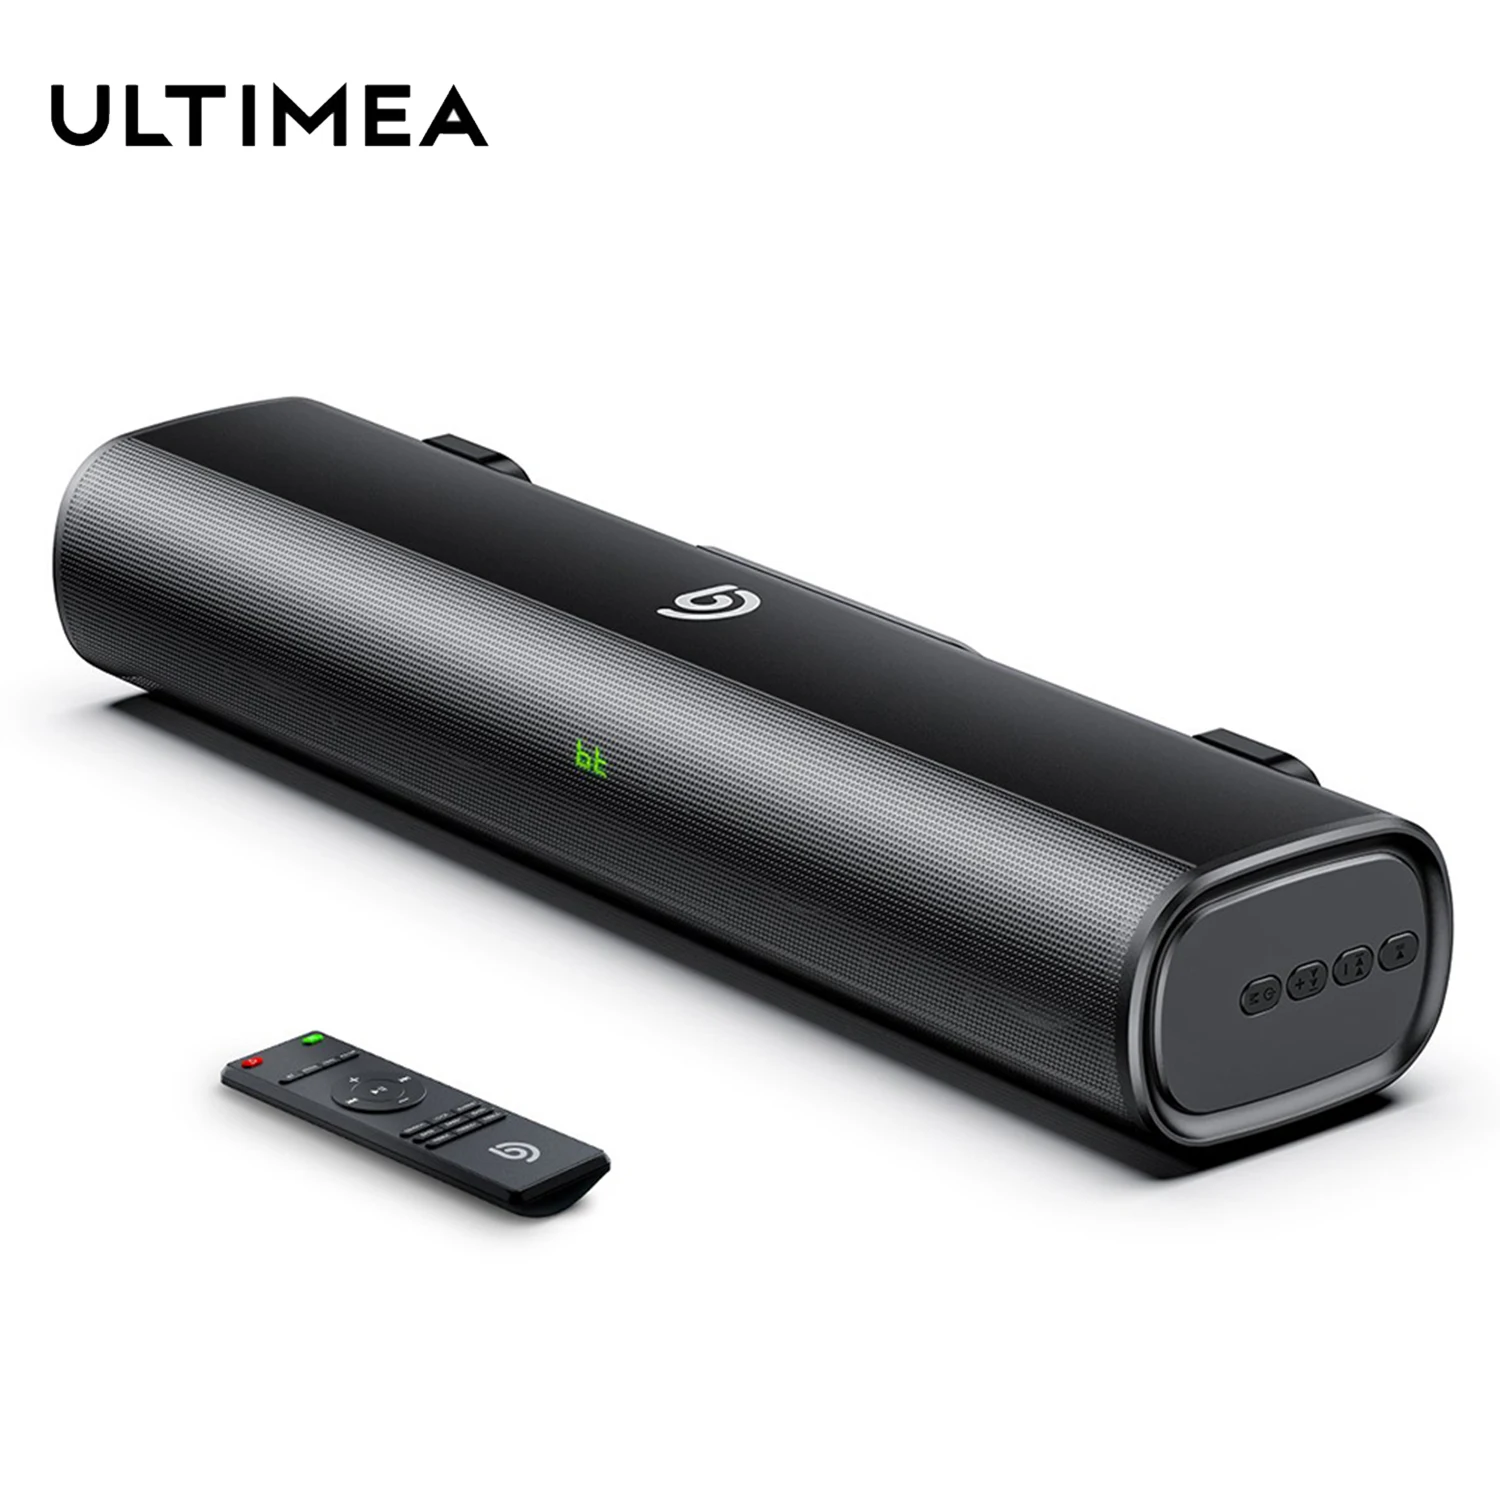 ULTIMEA 50W SoundBar for TV Home Theatre System 2.1CH Sound Box with Built-in Subwoofer 3D Stereo Wireless Bluetooth 5.0 Speaker